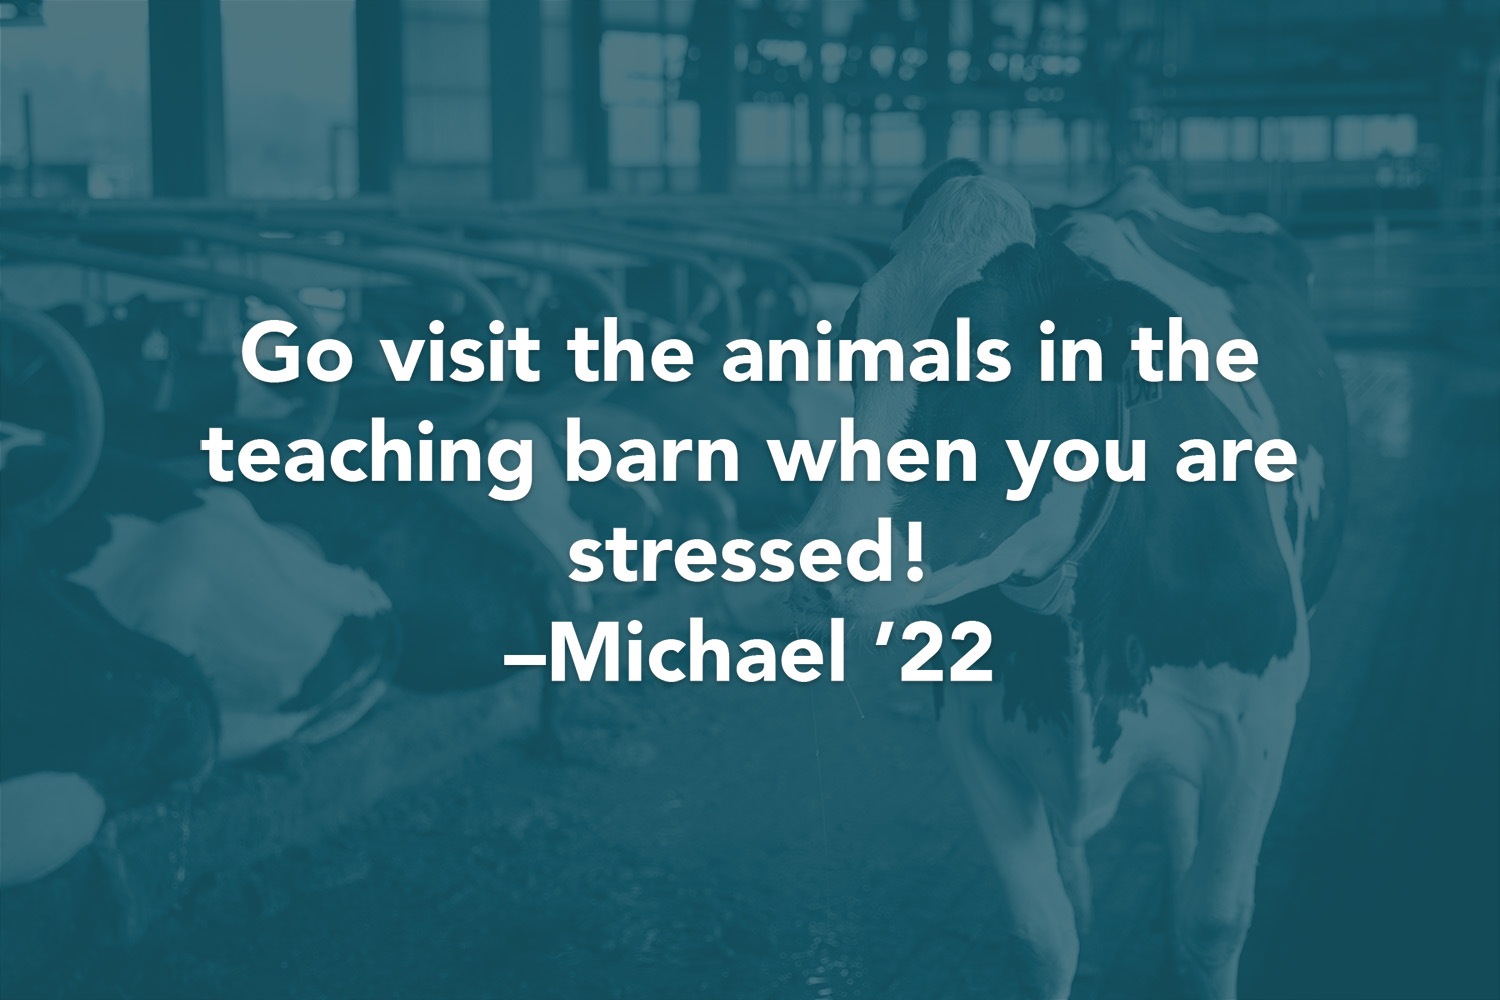 Quote: Go visit the animals in the teaching barn when you are stressed! -Michael '22